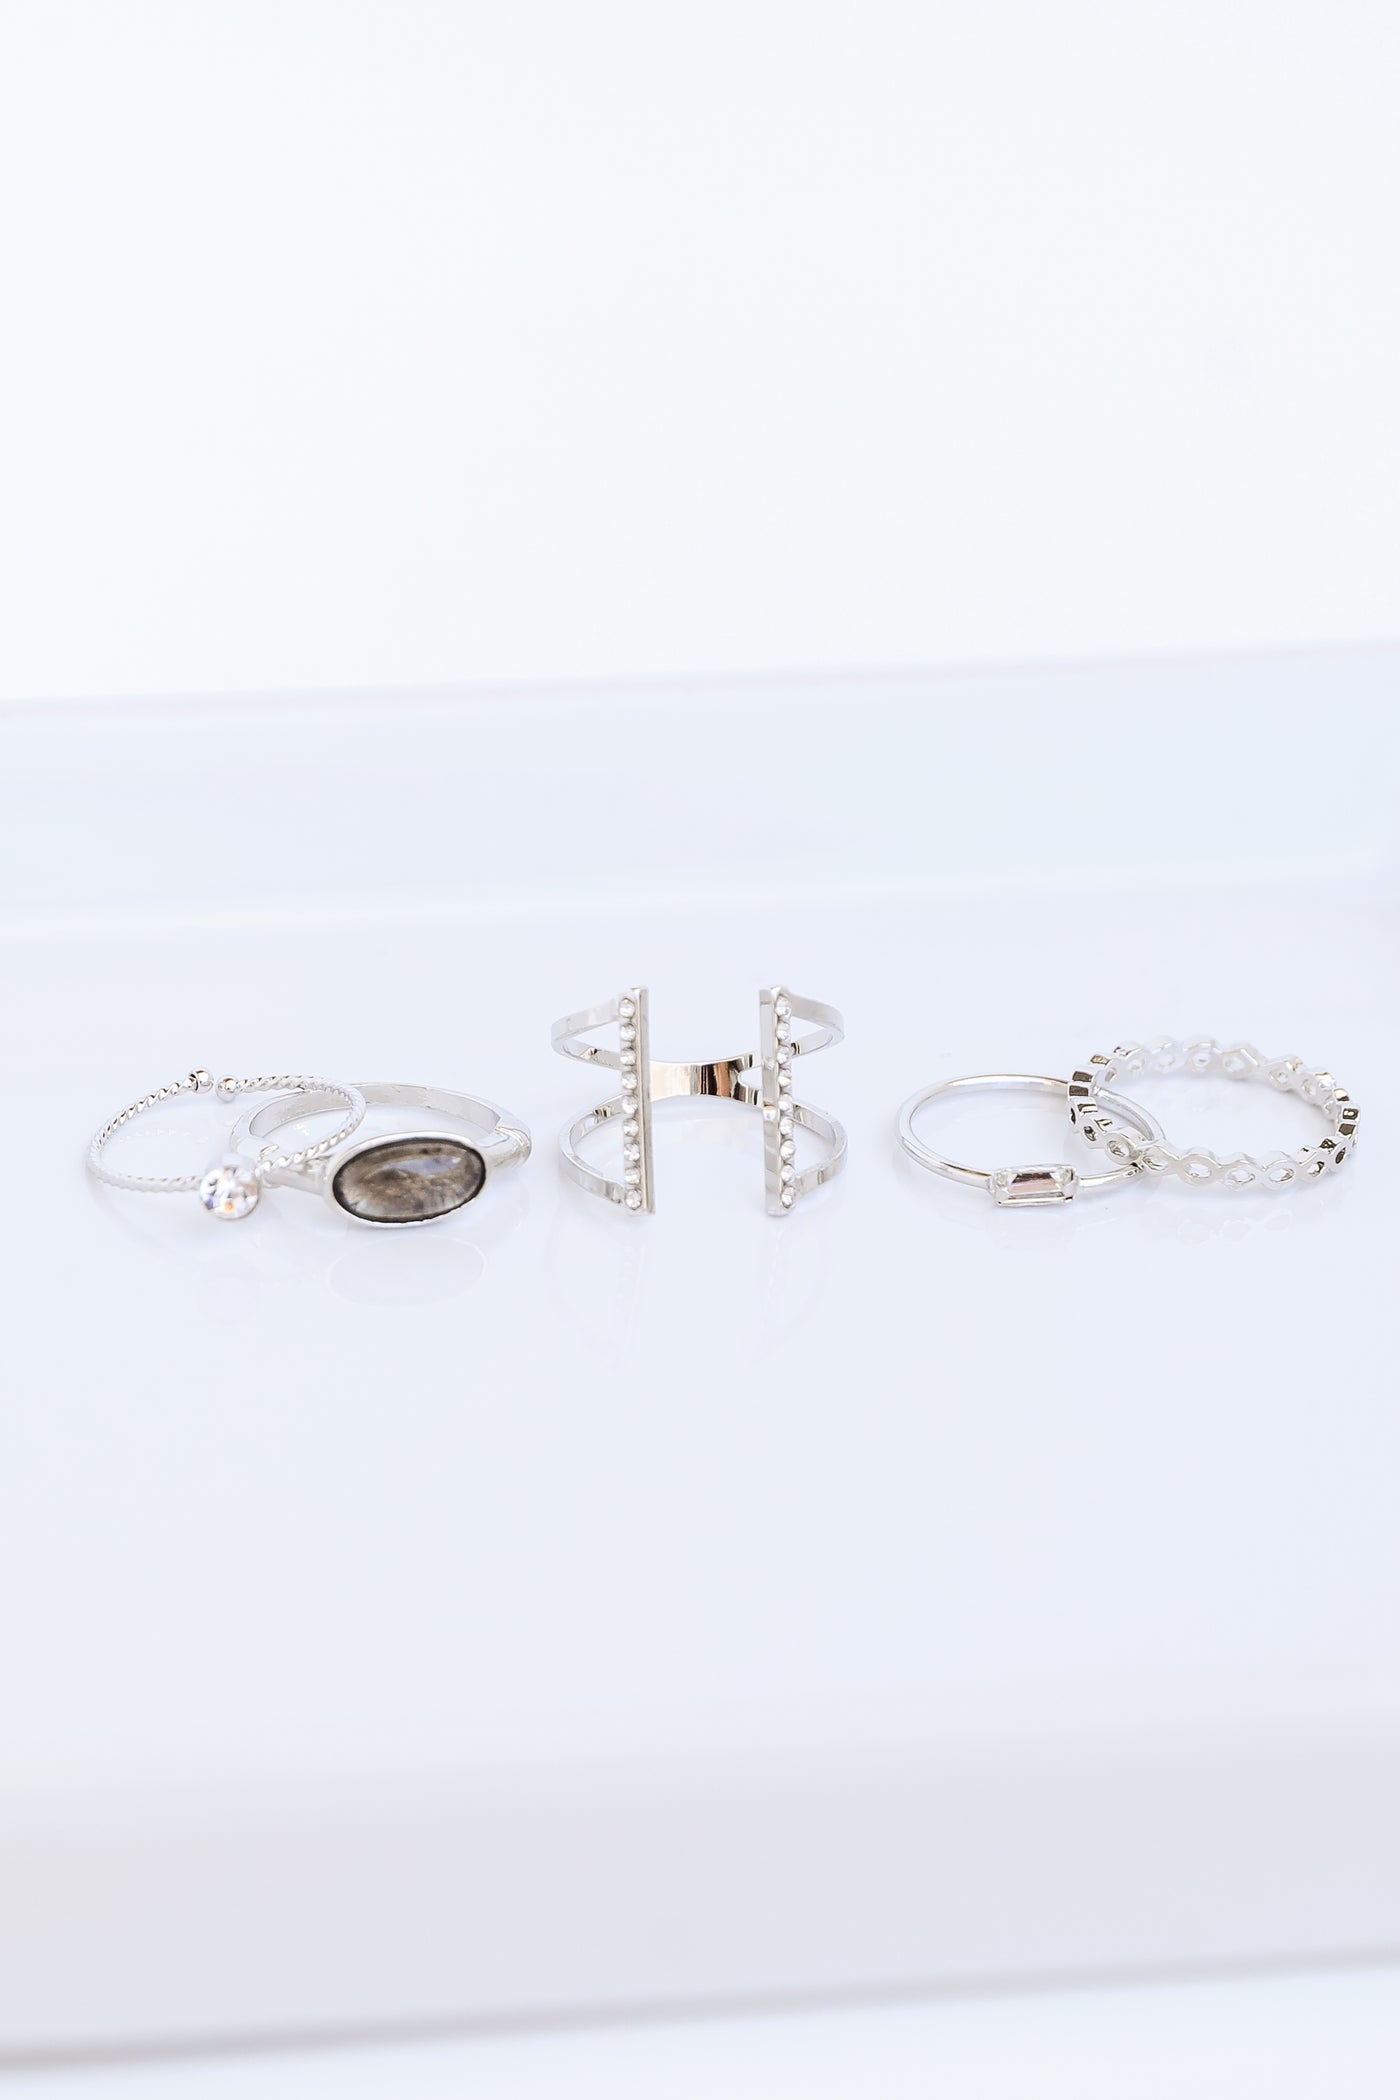 Ring Set in silver flat lay